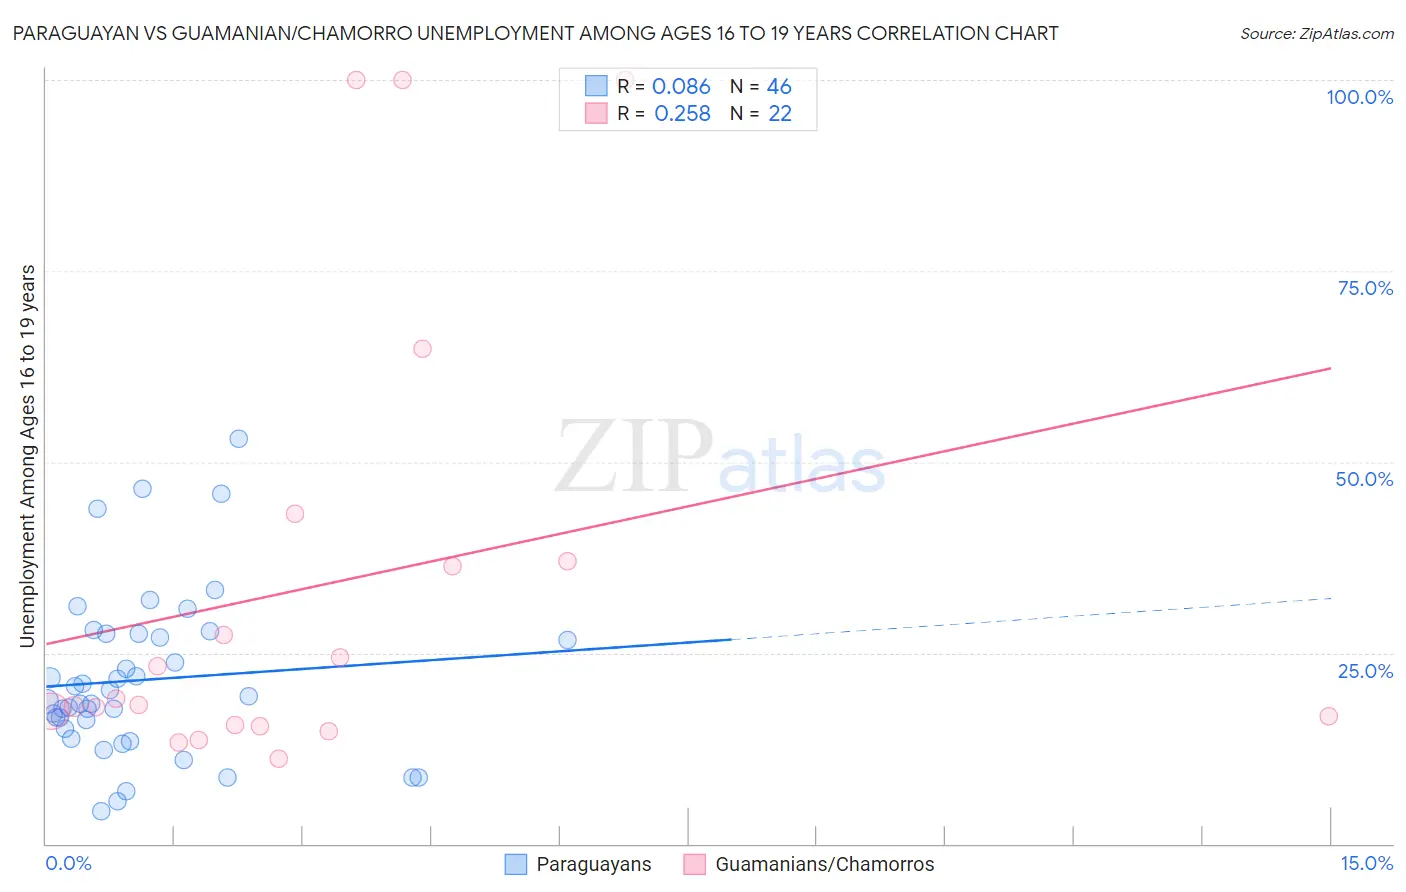 Paraguayan vs Guamanian/Chamorro Unemployment Among Ages 16 to 19 years